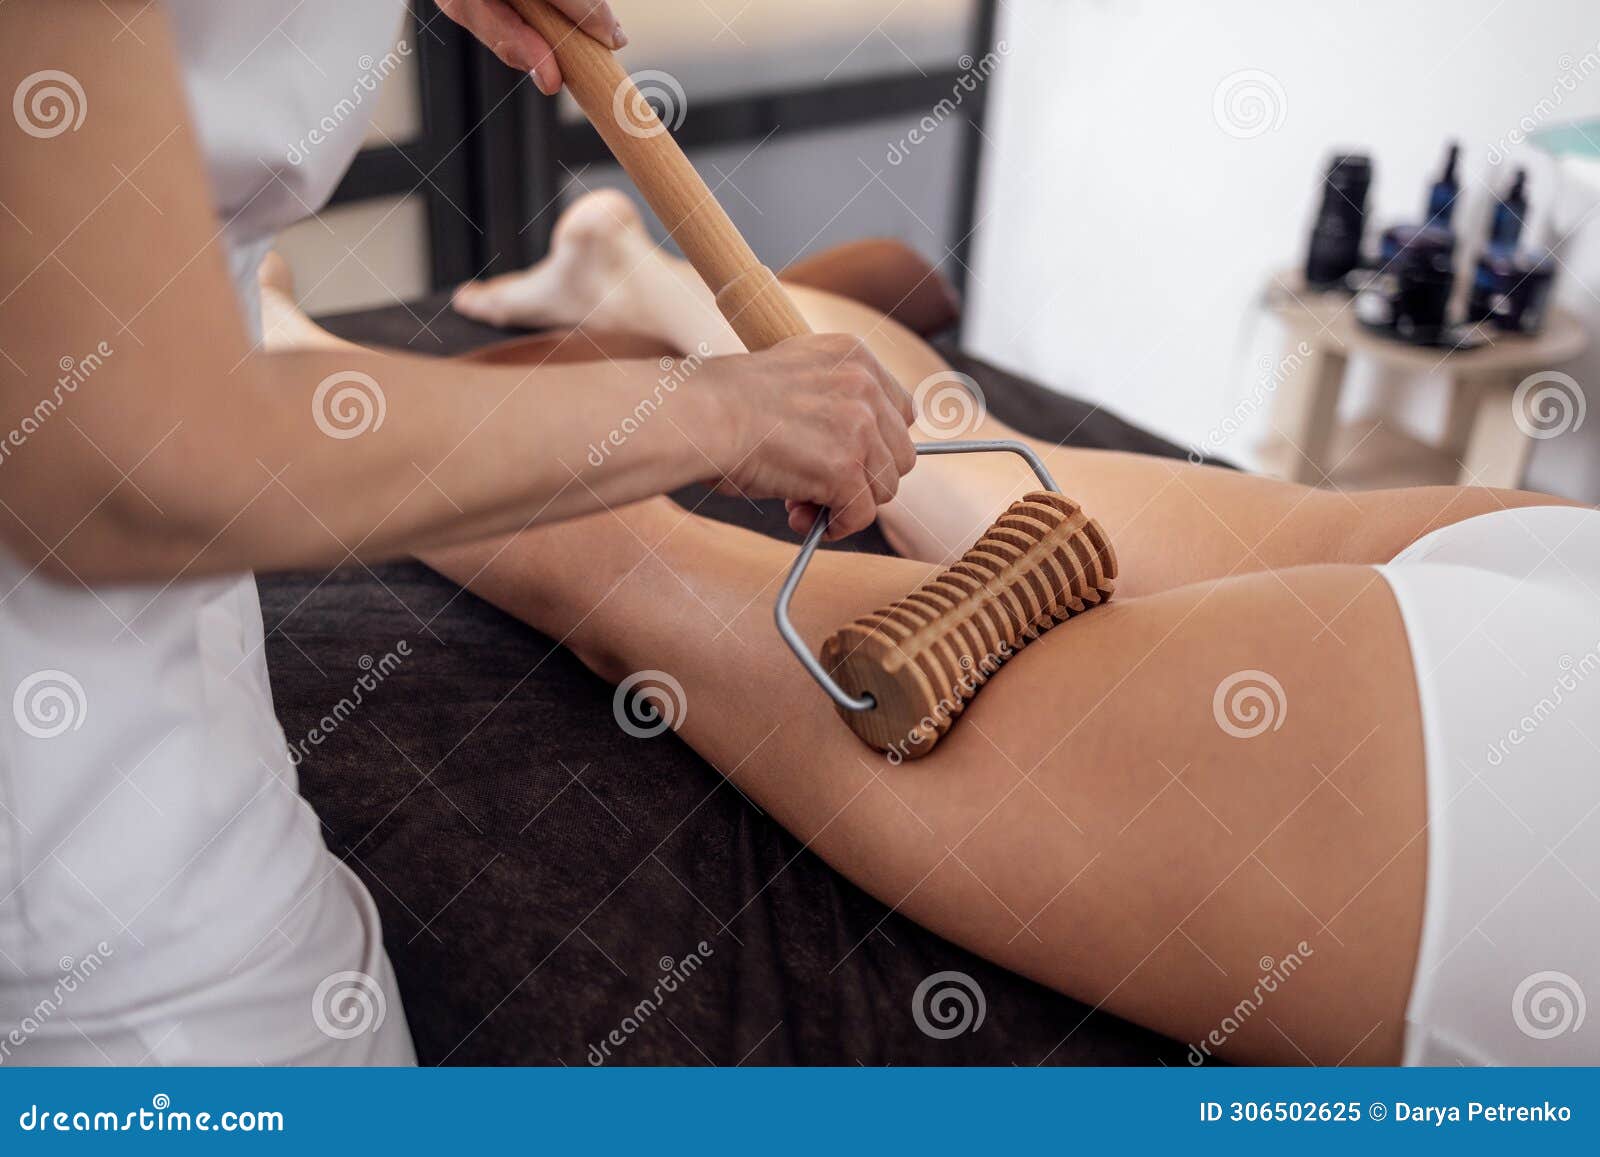 massage madera. maderotherapy anti cellulite massage treatment with wooden prop